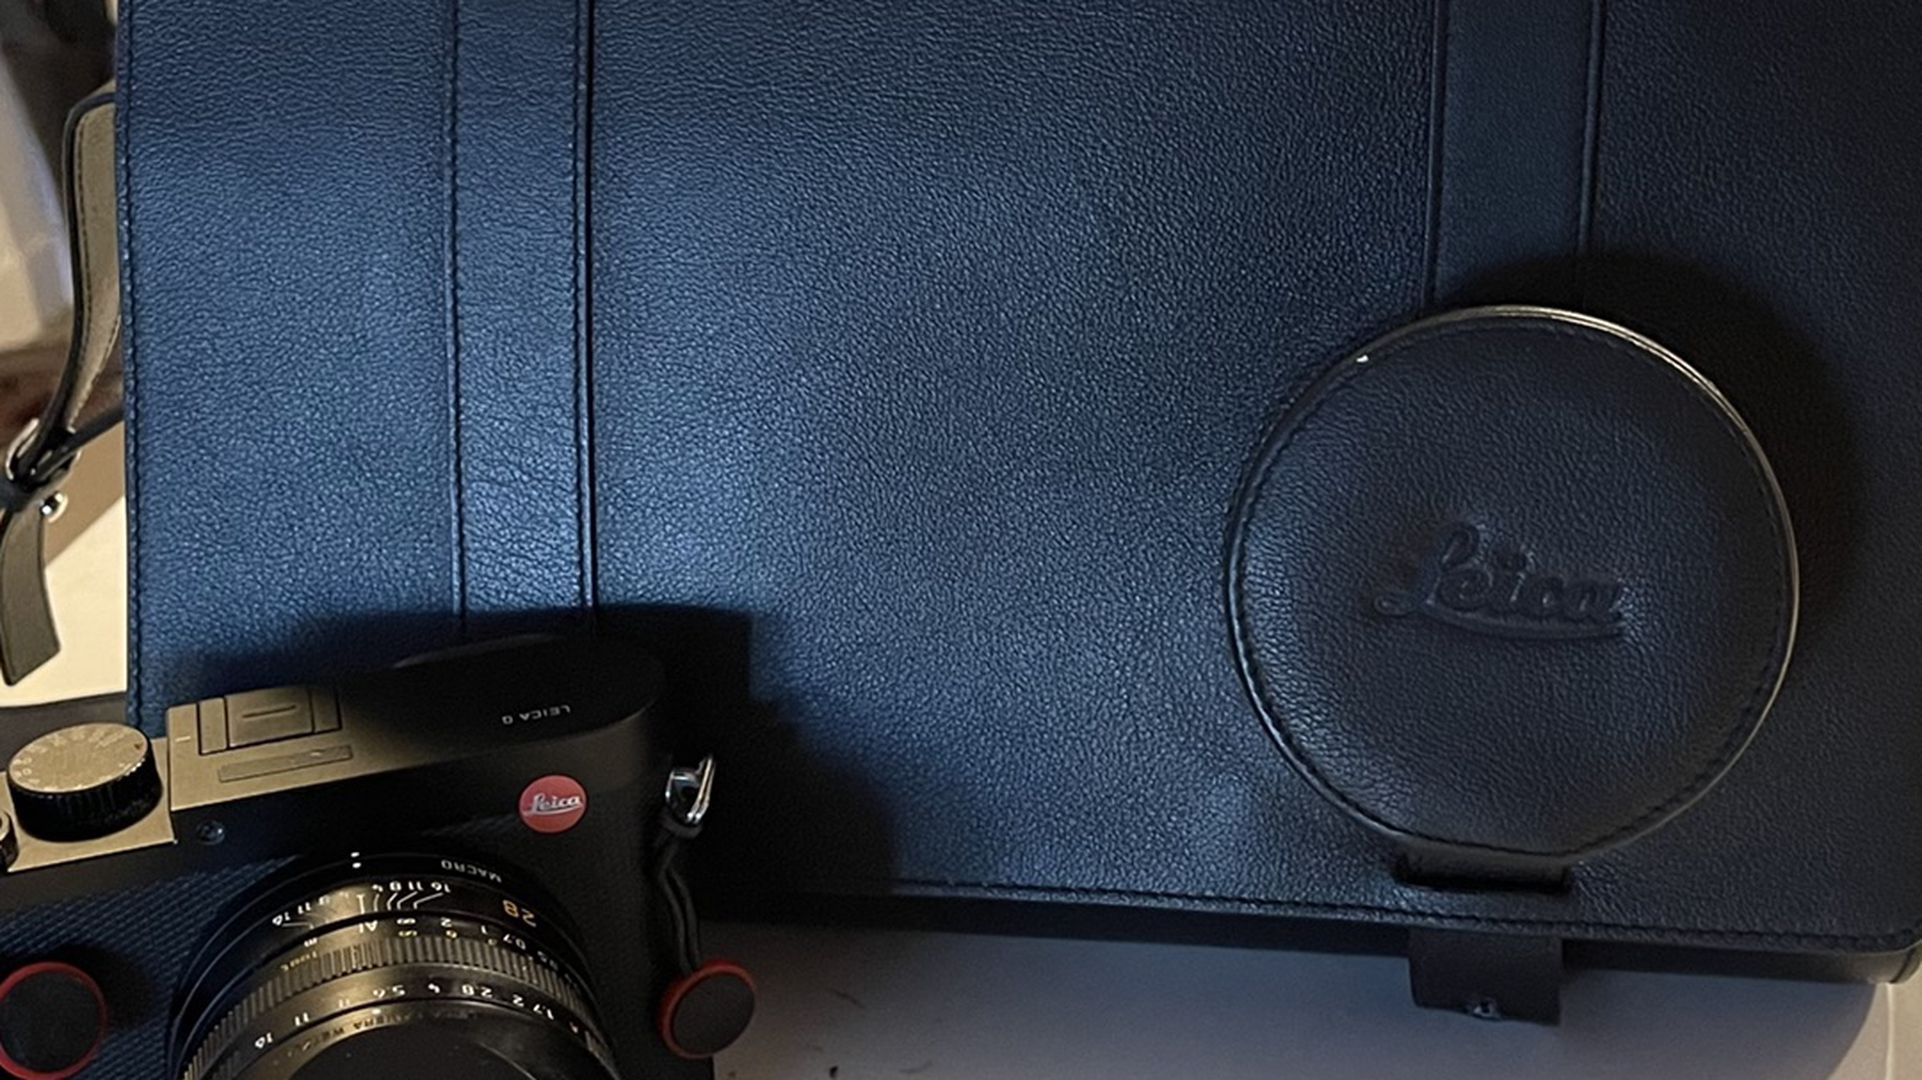 Leica Day Bag for the Q or Q2